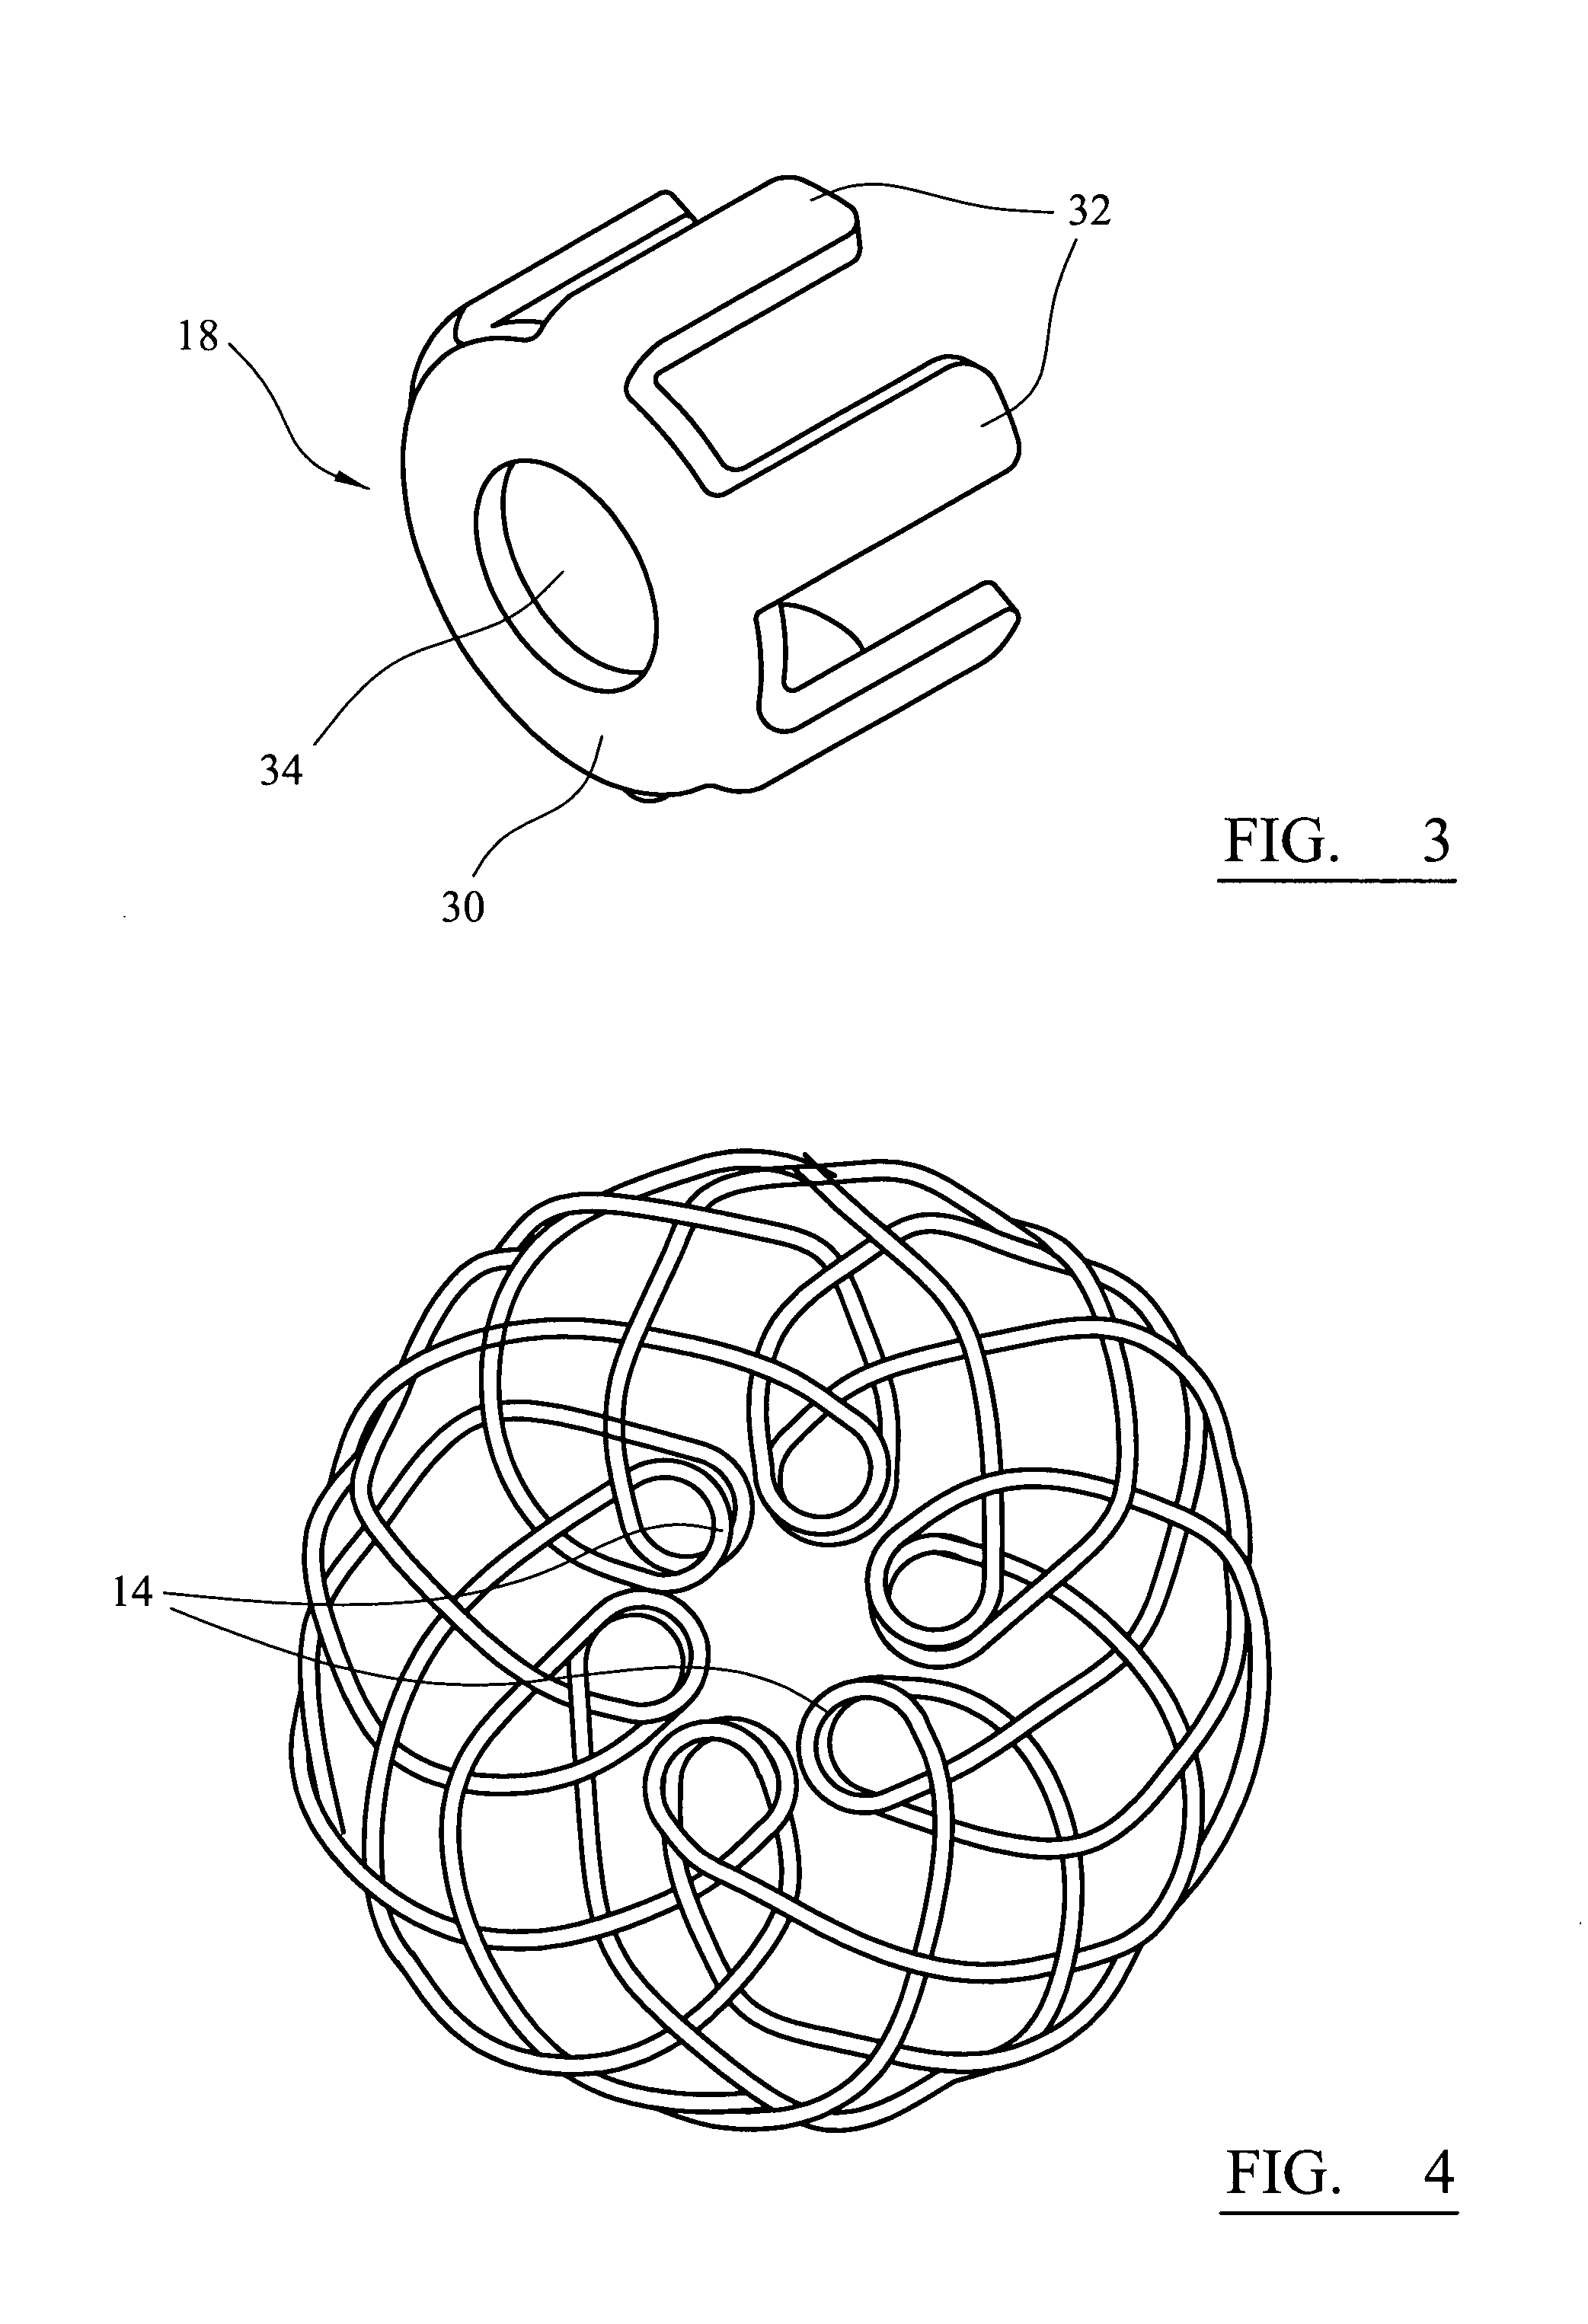 Support structure implant for a bone cavity